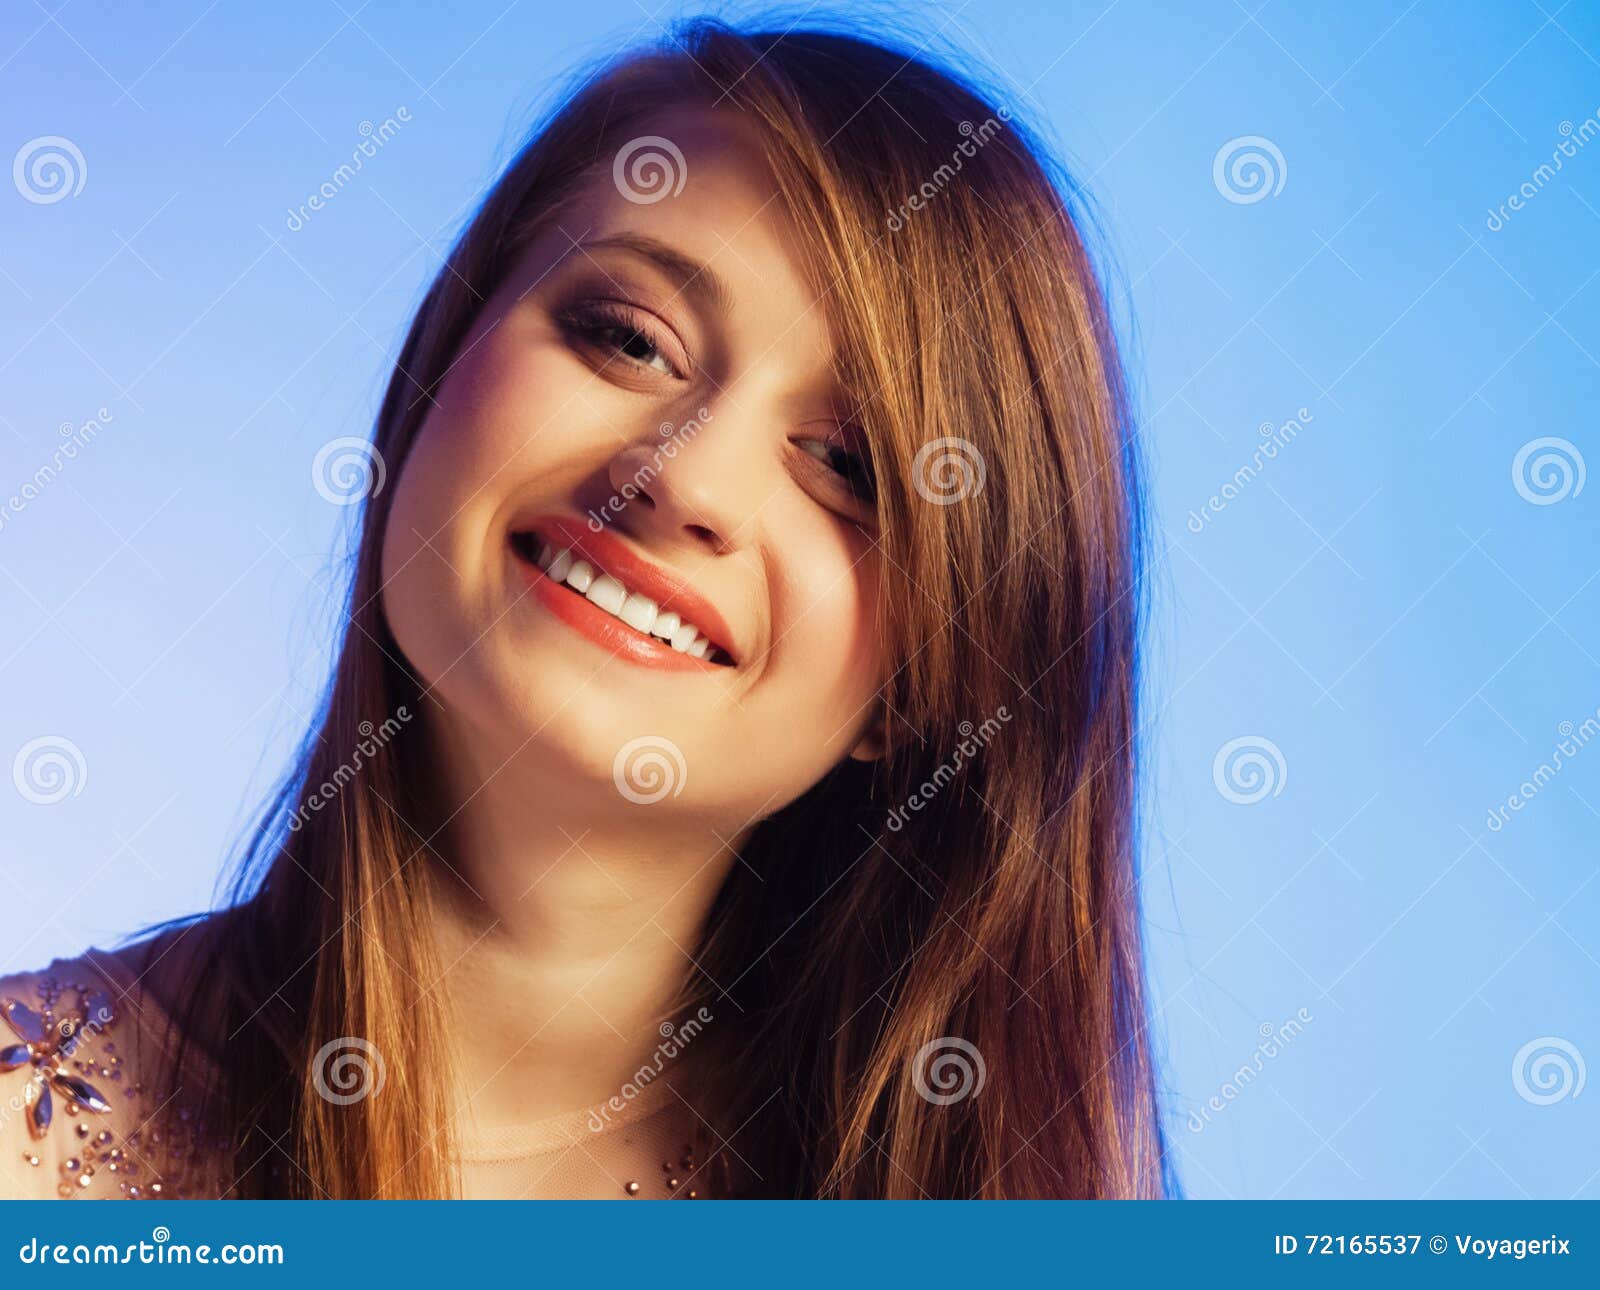 Woman Face with Bang Covering Her Eye. Stock Image - Image of bang,  elegant: 72165537